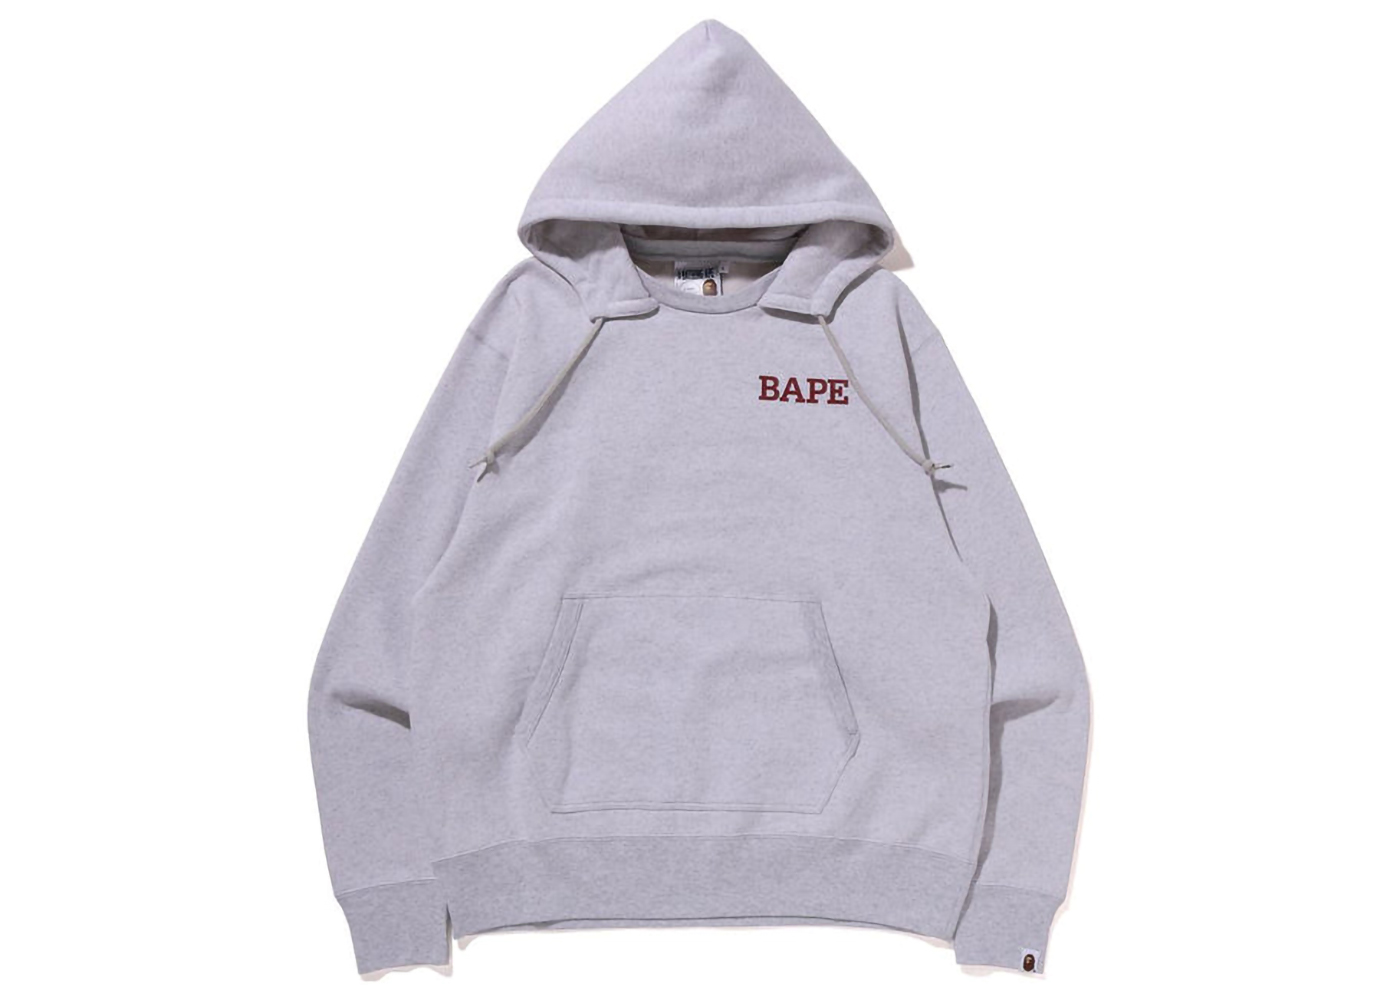 BAPE A Bathing Ape Overdye Pullover Relaxed Fit Hoodie Orange